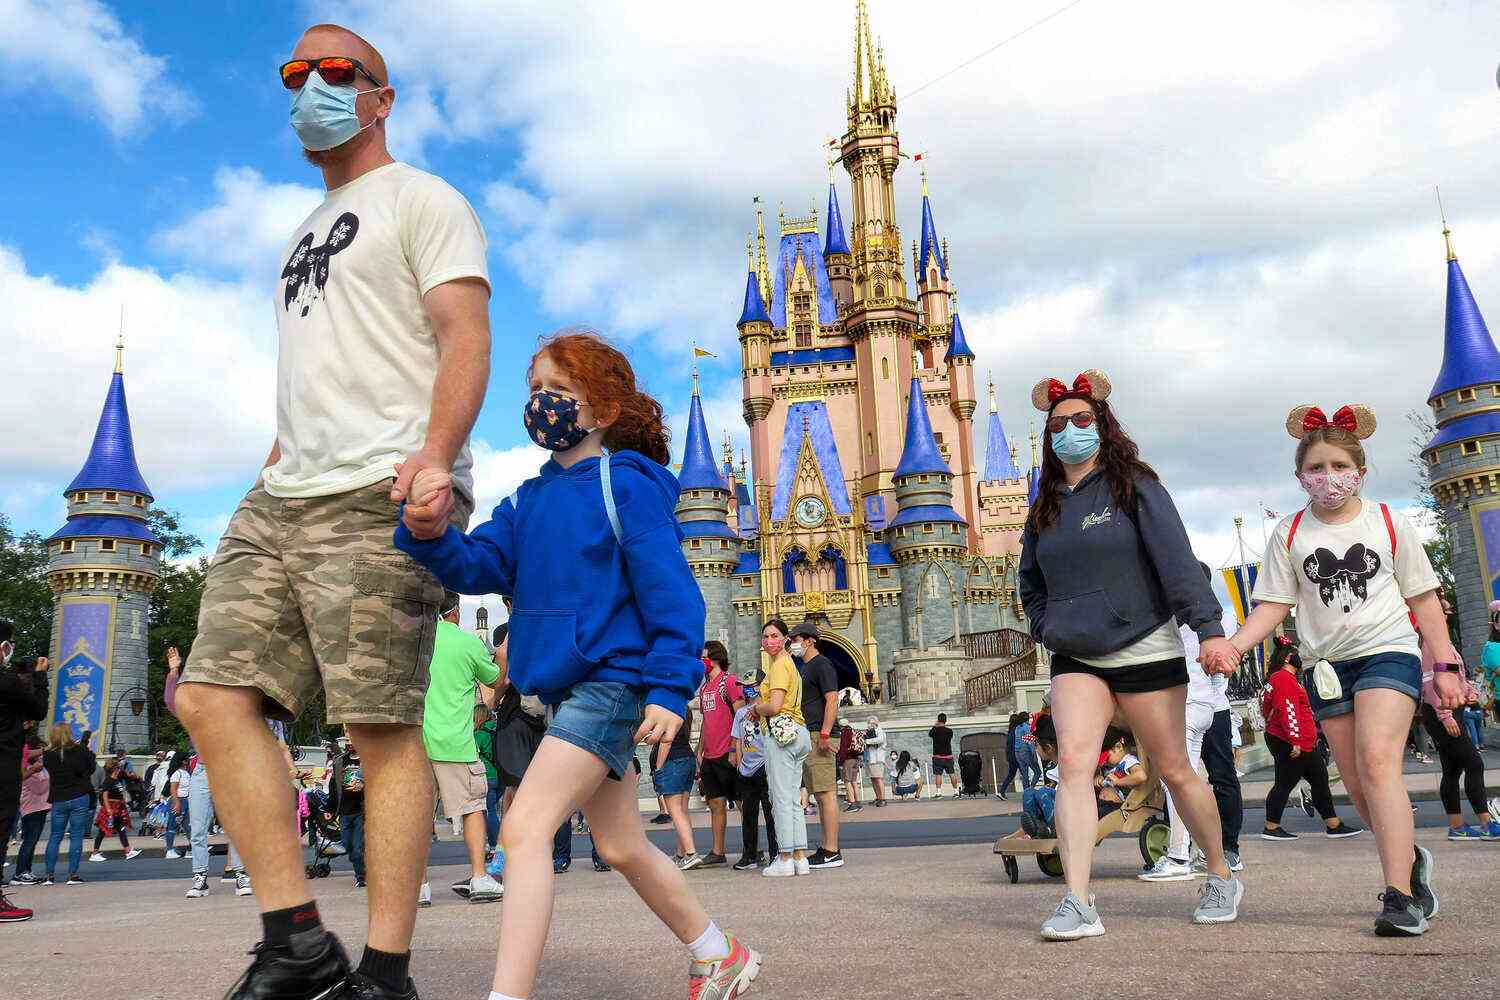 Disney abruptly withdraws mandatory vaccinations